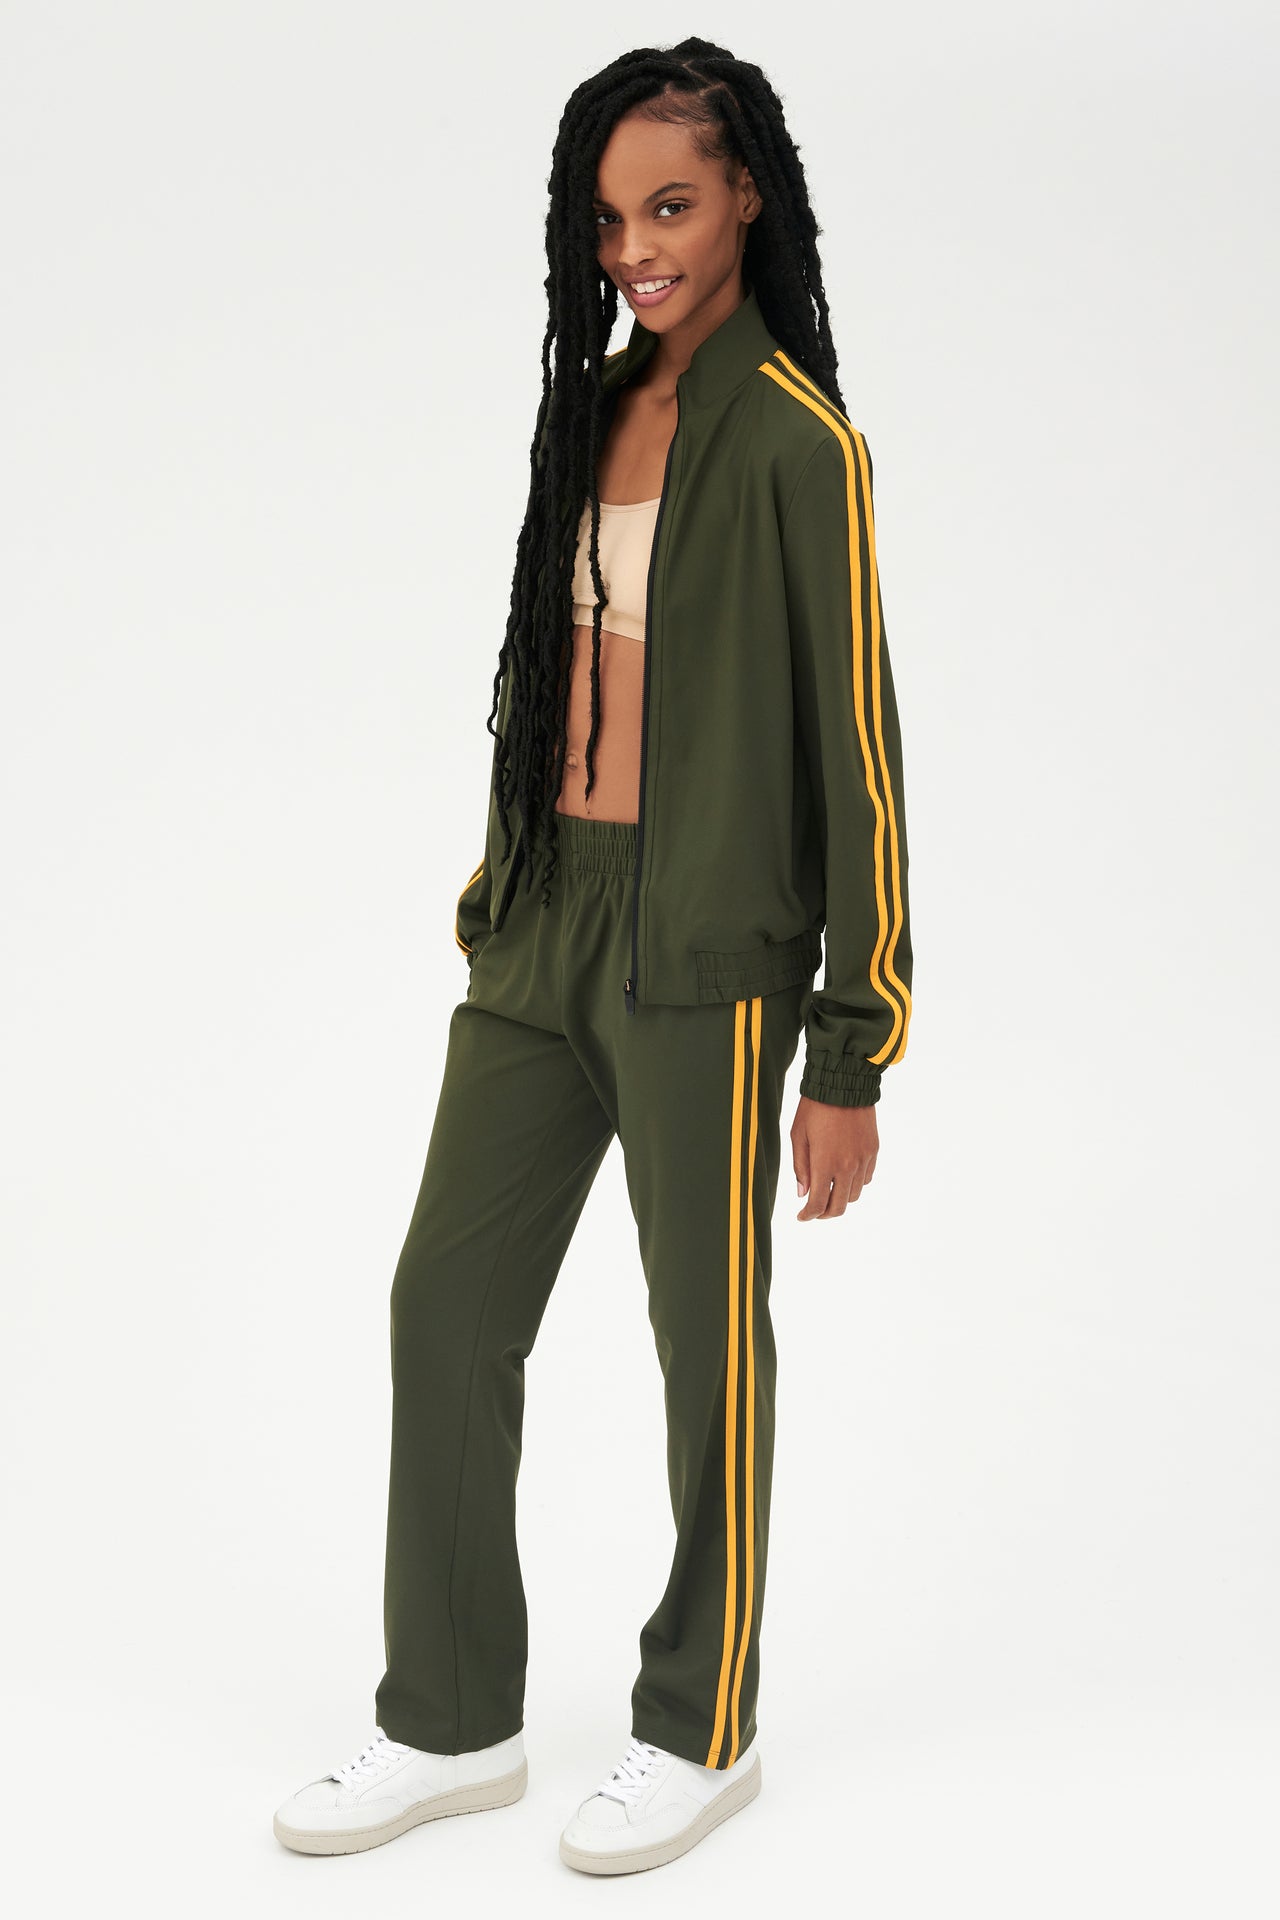 Full side view of girl wearing dark green zip jacket that stops under chin with two yellow stripes down the side and a dark green sweatpants with white shoes